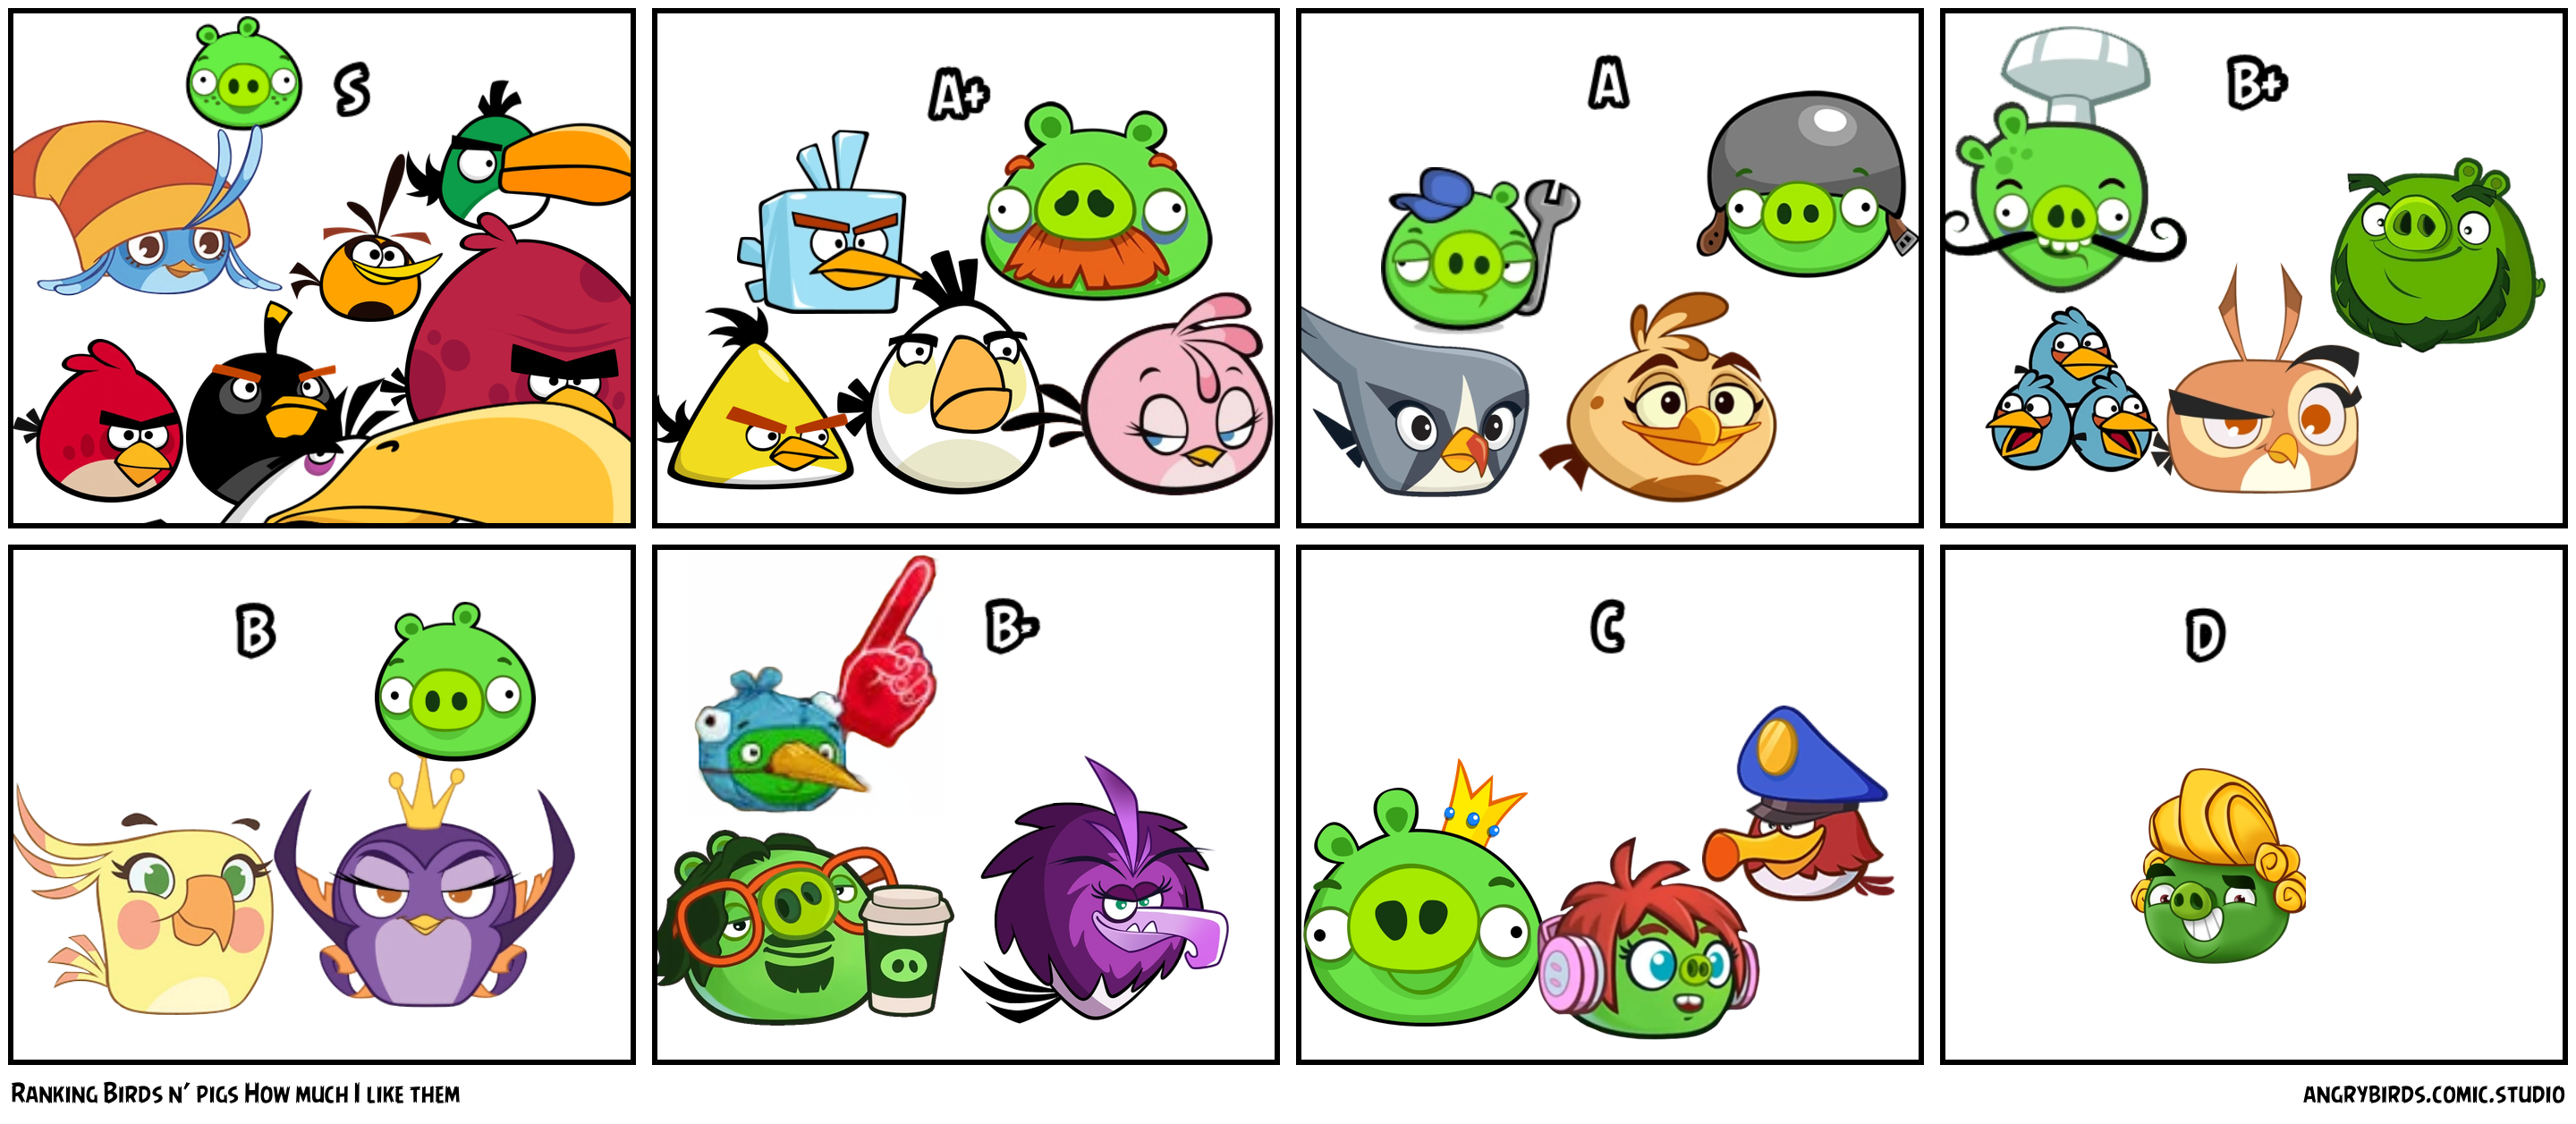 Ranking Birds n’ pigs How much I like them